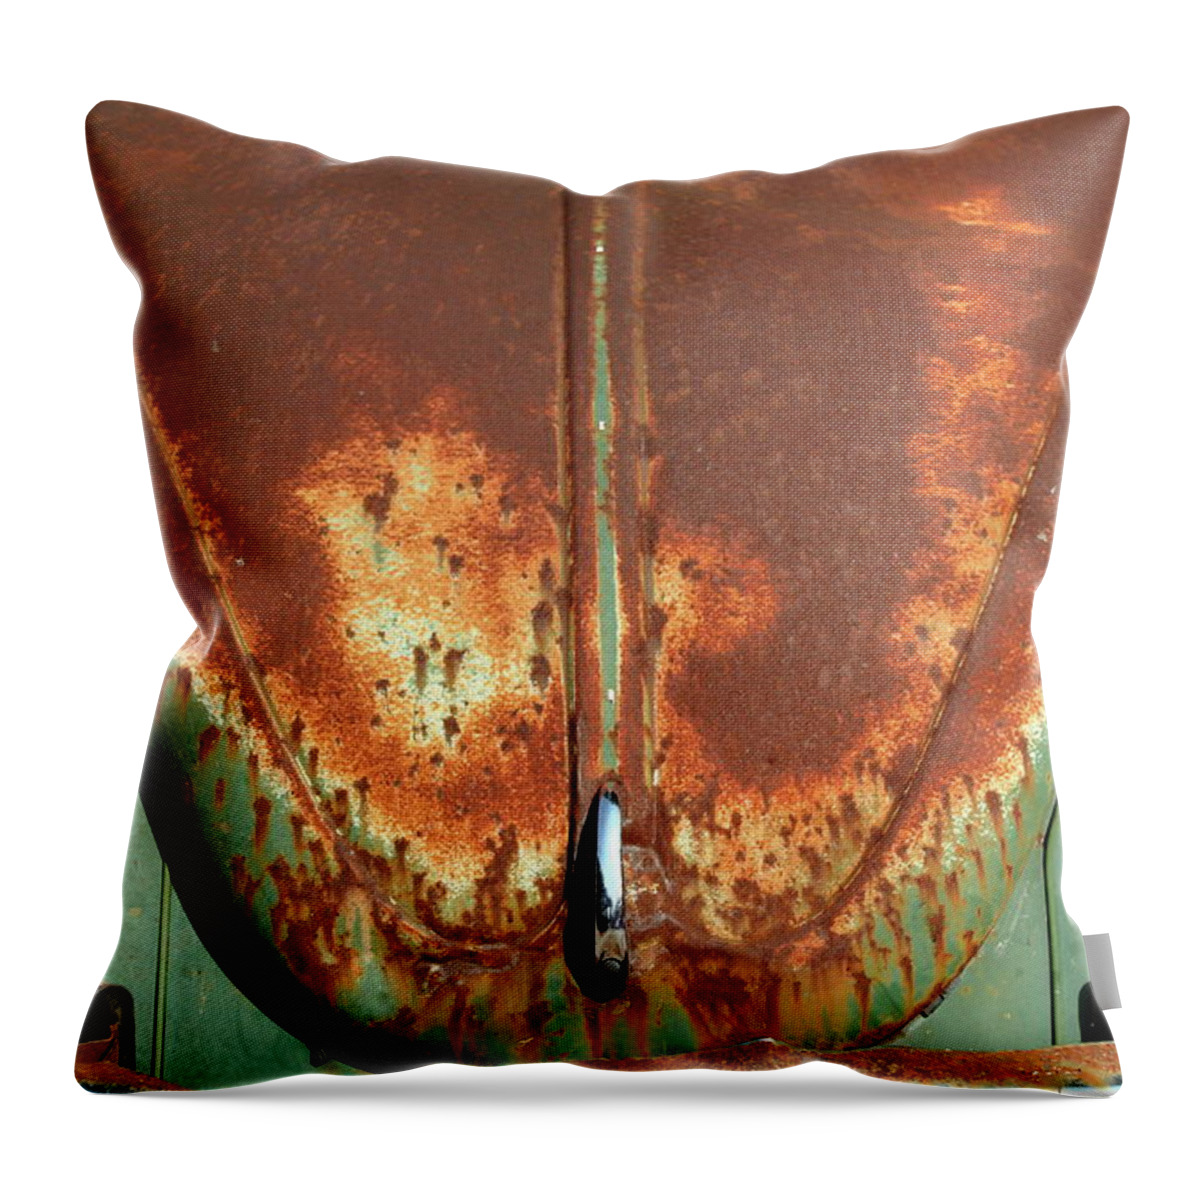 Volkswagen Beetle Throw Pillow featuring the photograph Rusty and Crusty by Lens Art Photography By Larry Trager